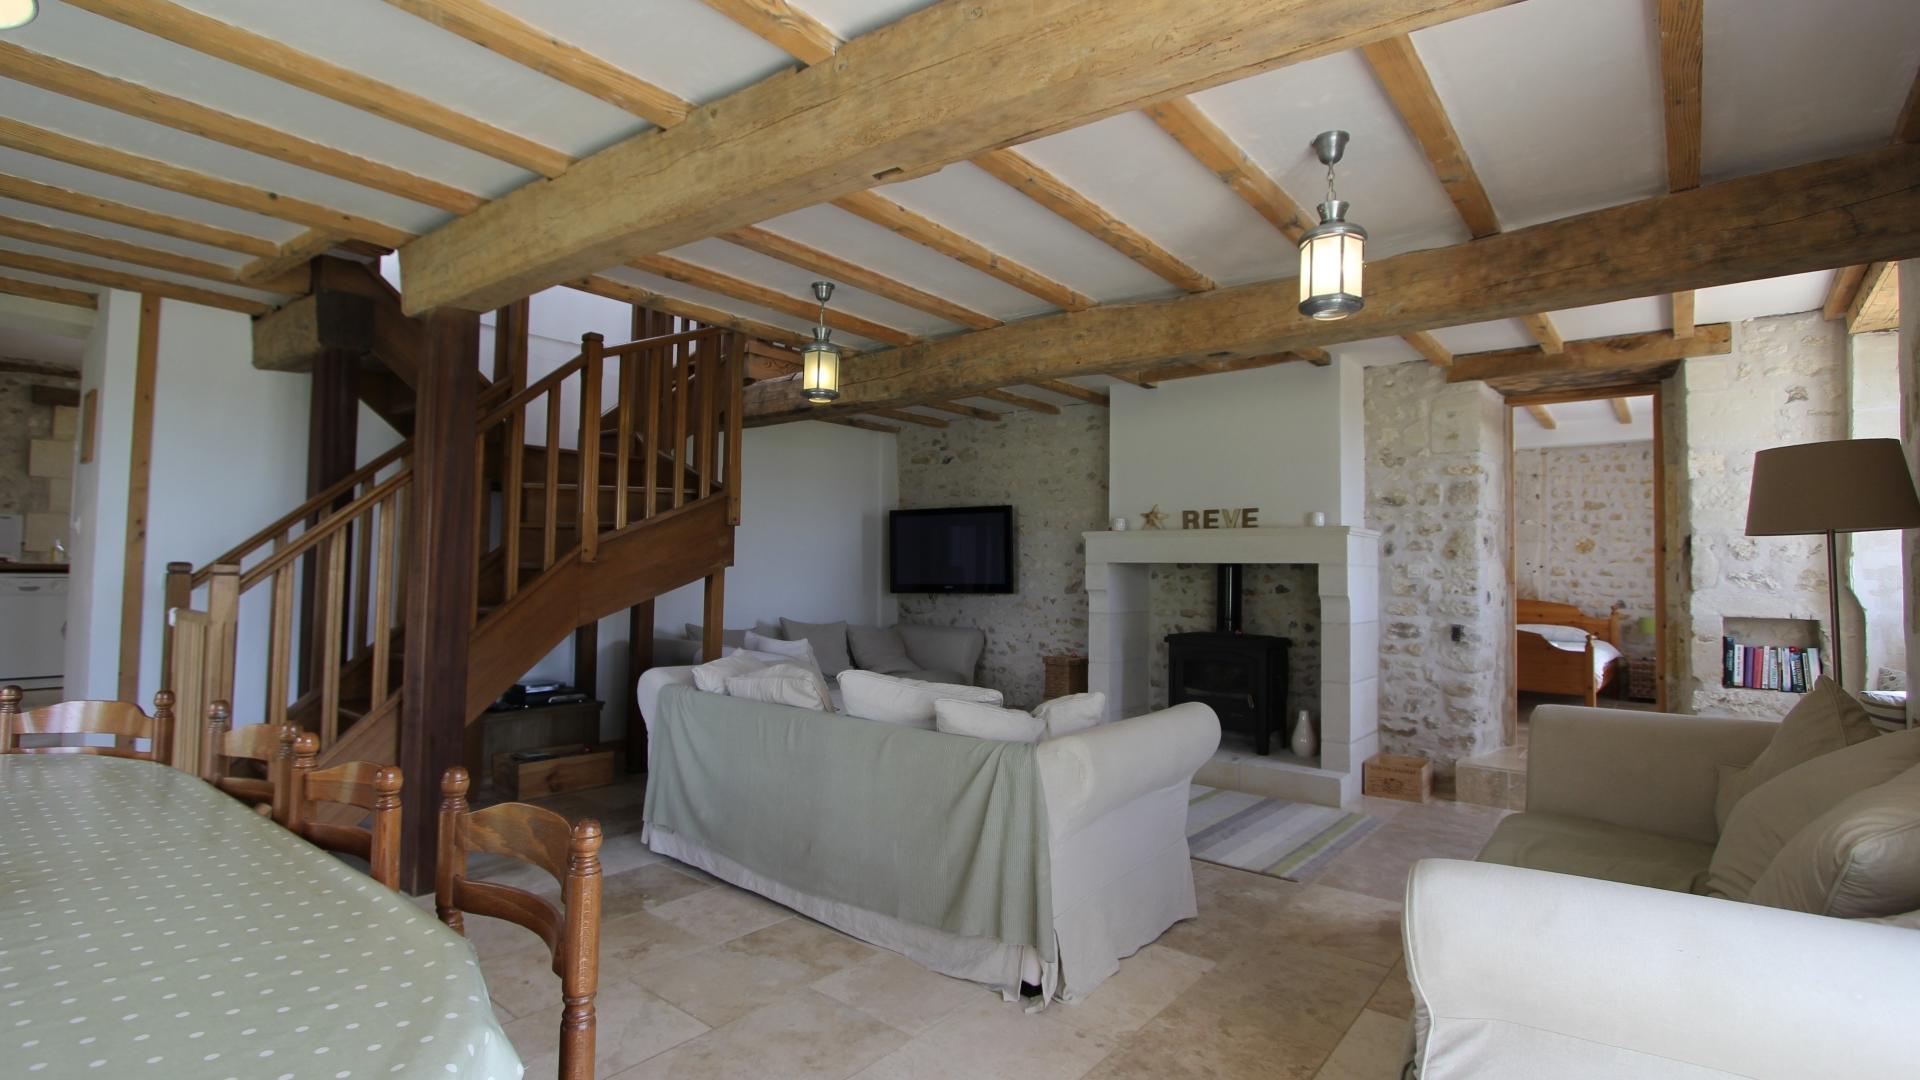 5 Bedroom Cottage/shared facilities in Poitou-Charentes, France